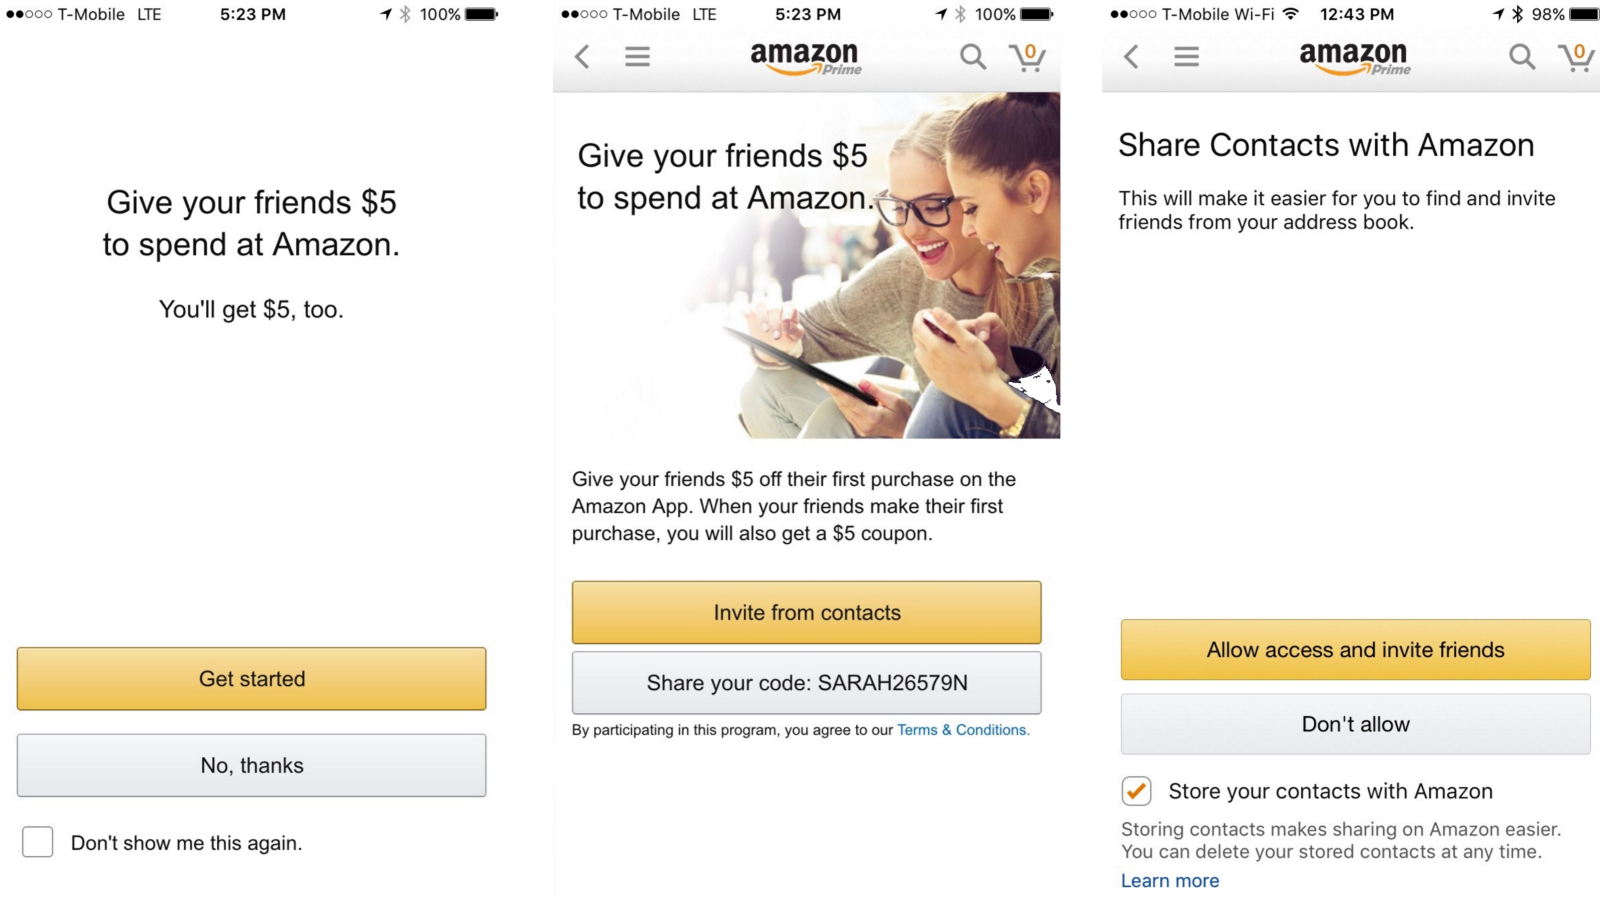 Amazon Word of Mouth Improves Installs